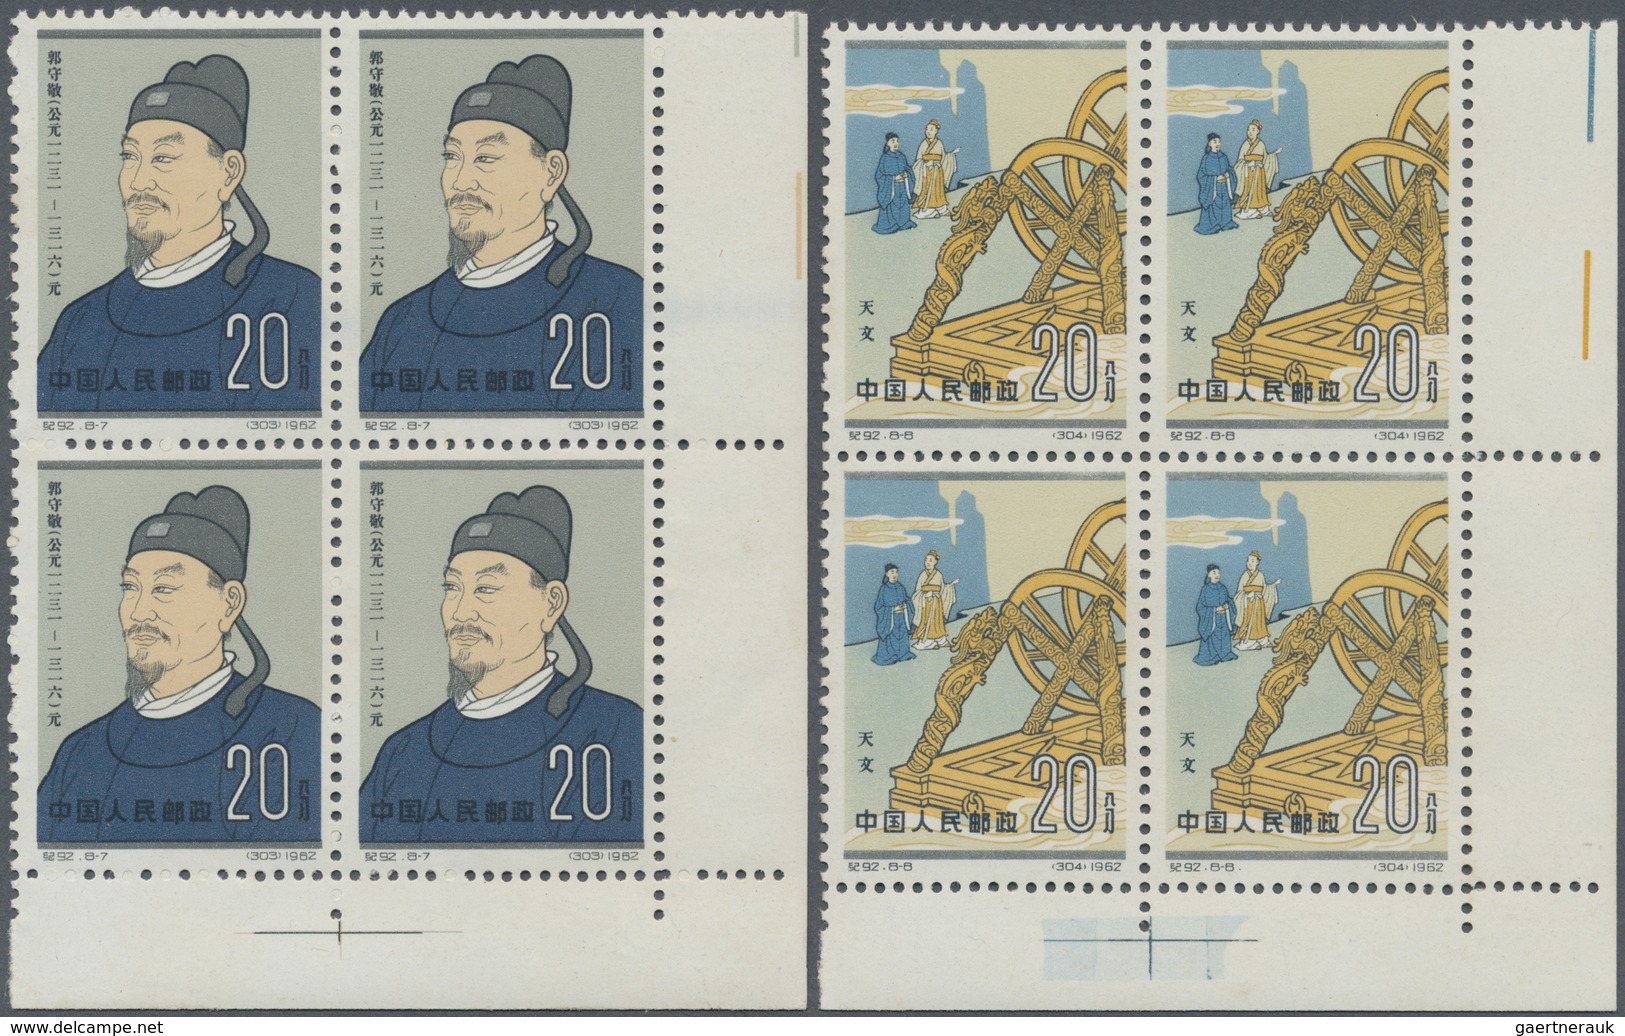 **/(*)/ China - Volksrepublik: 1962, folk dance (I) W49, Albania C96 and old China scientists C92 in NG as i